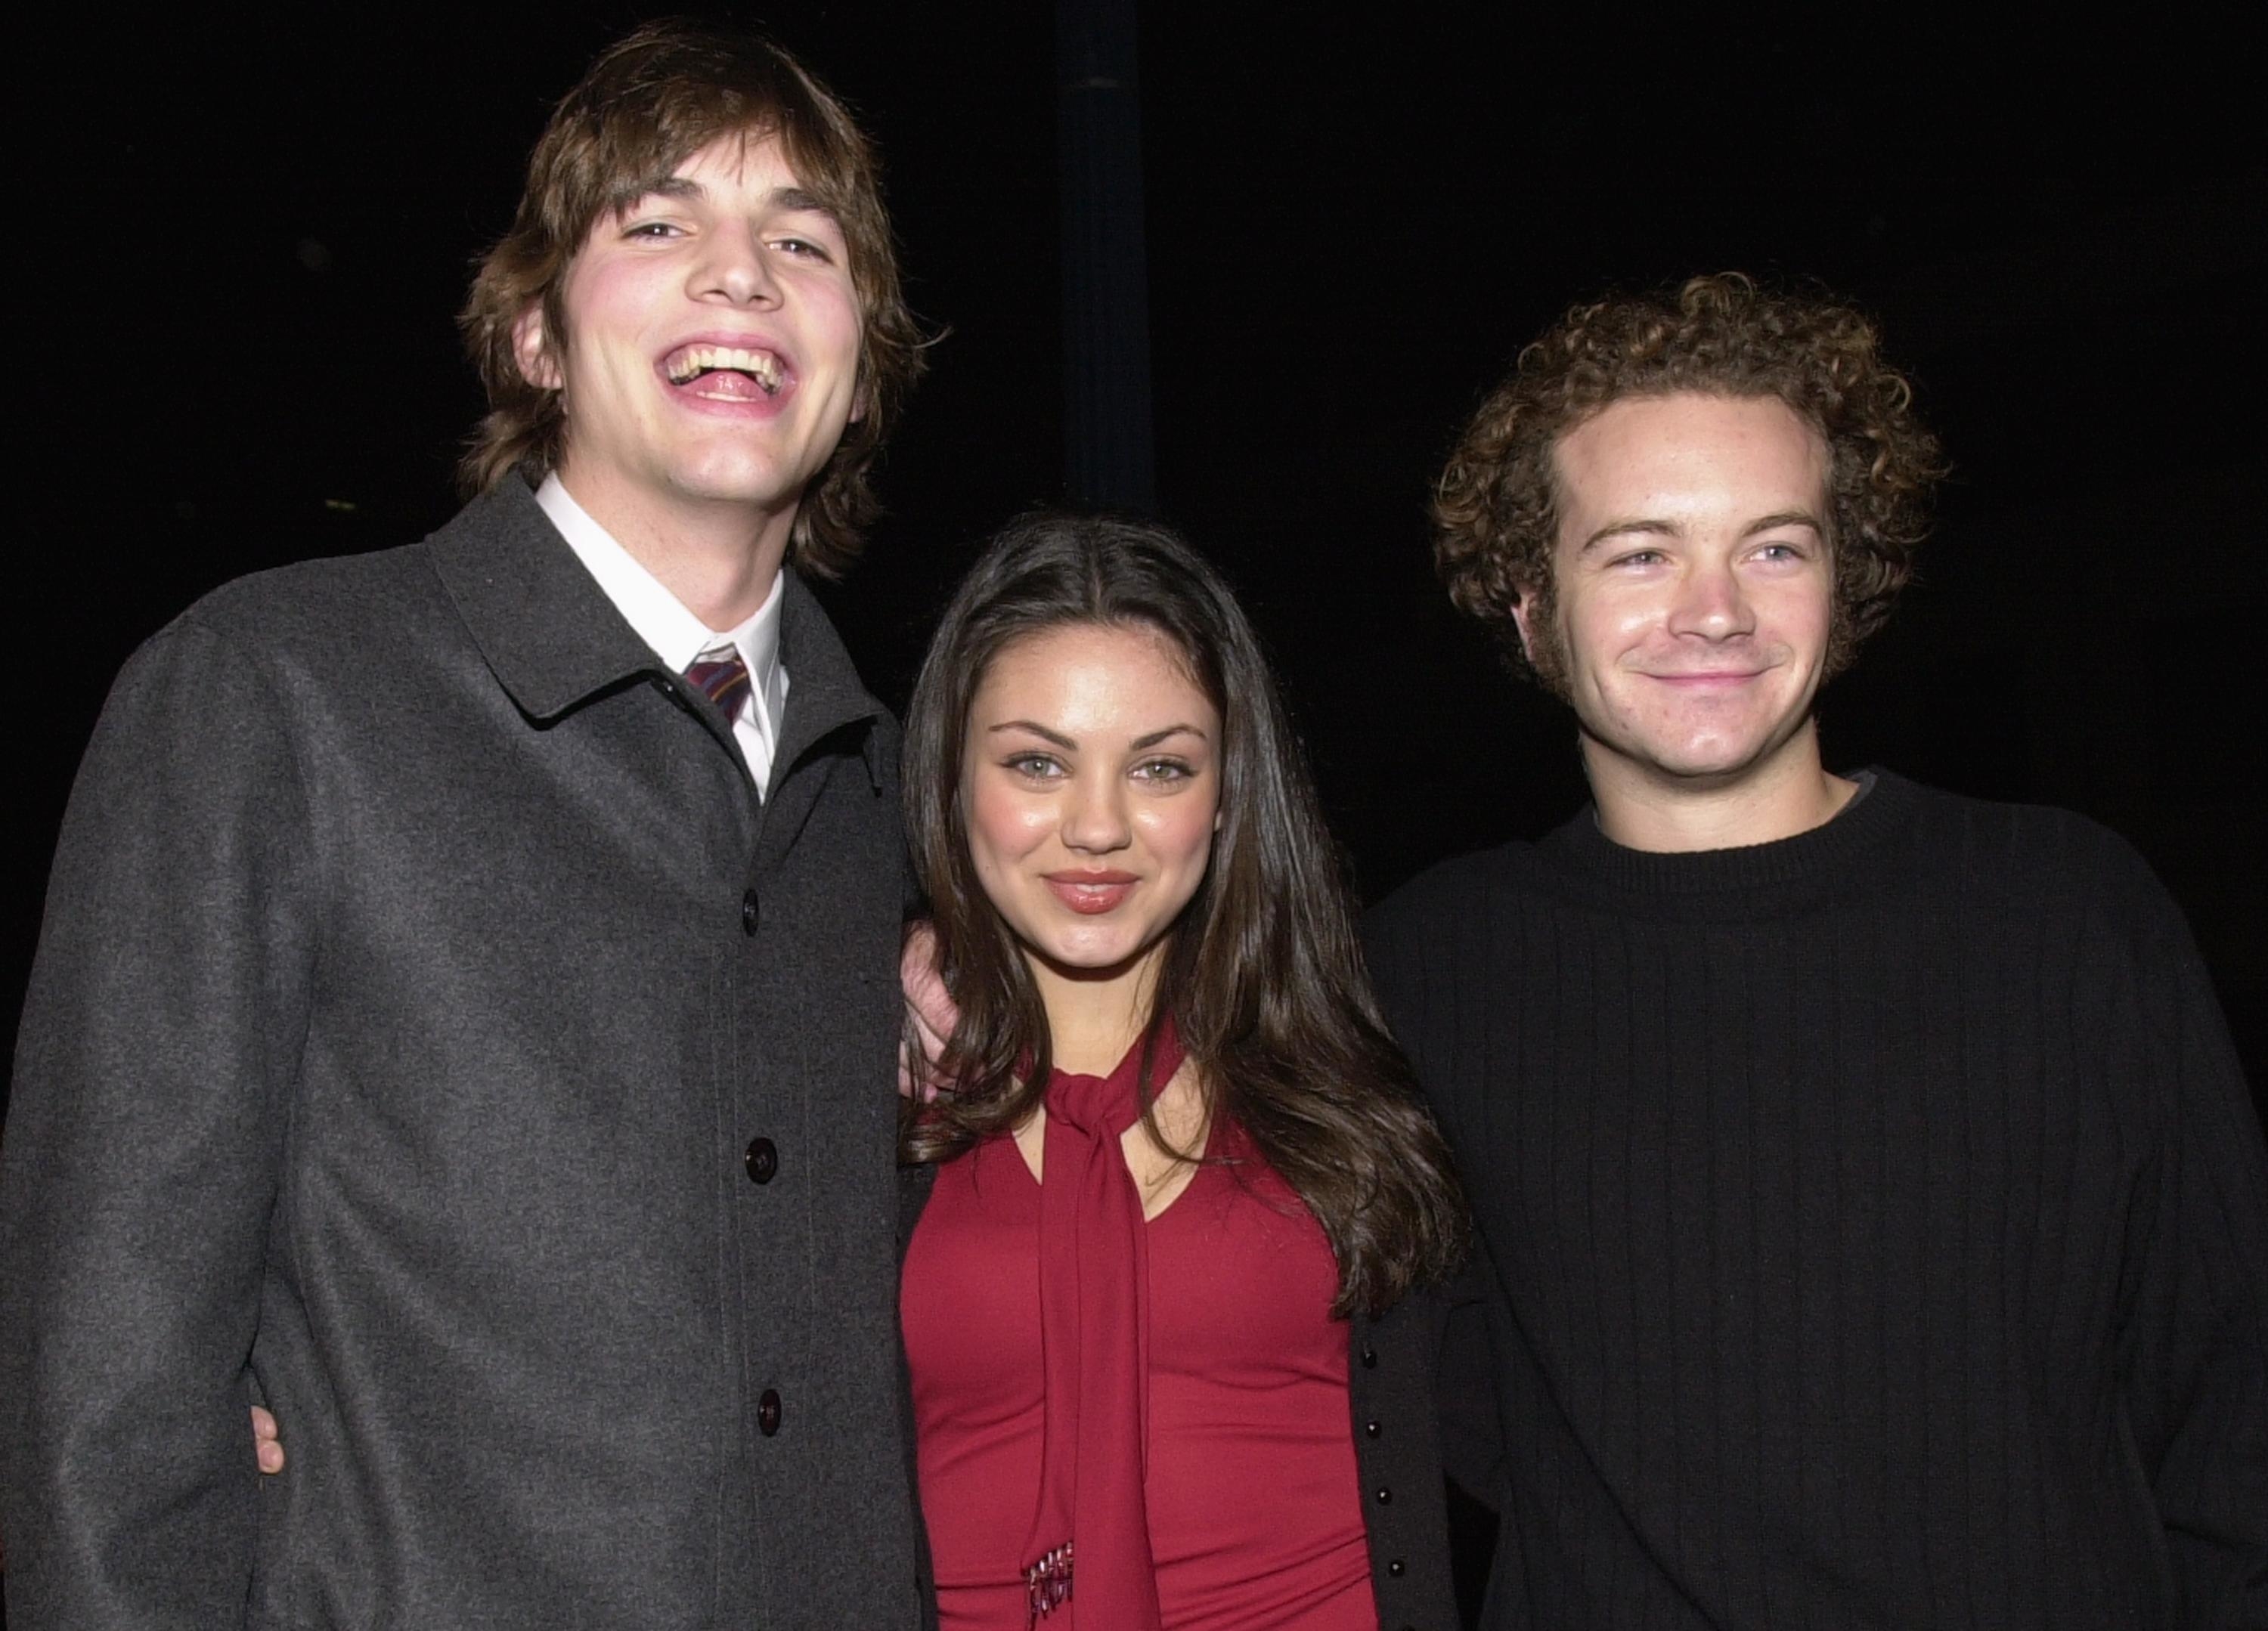 From left to right: Ashton, Mila, and Danny